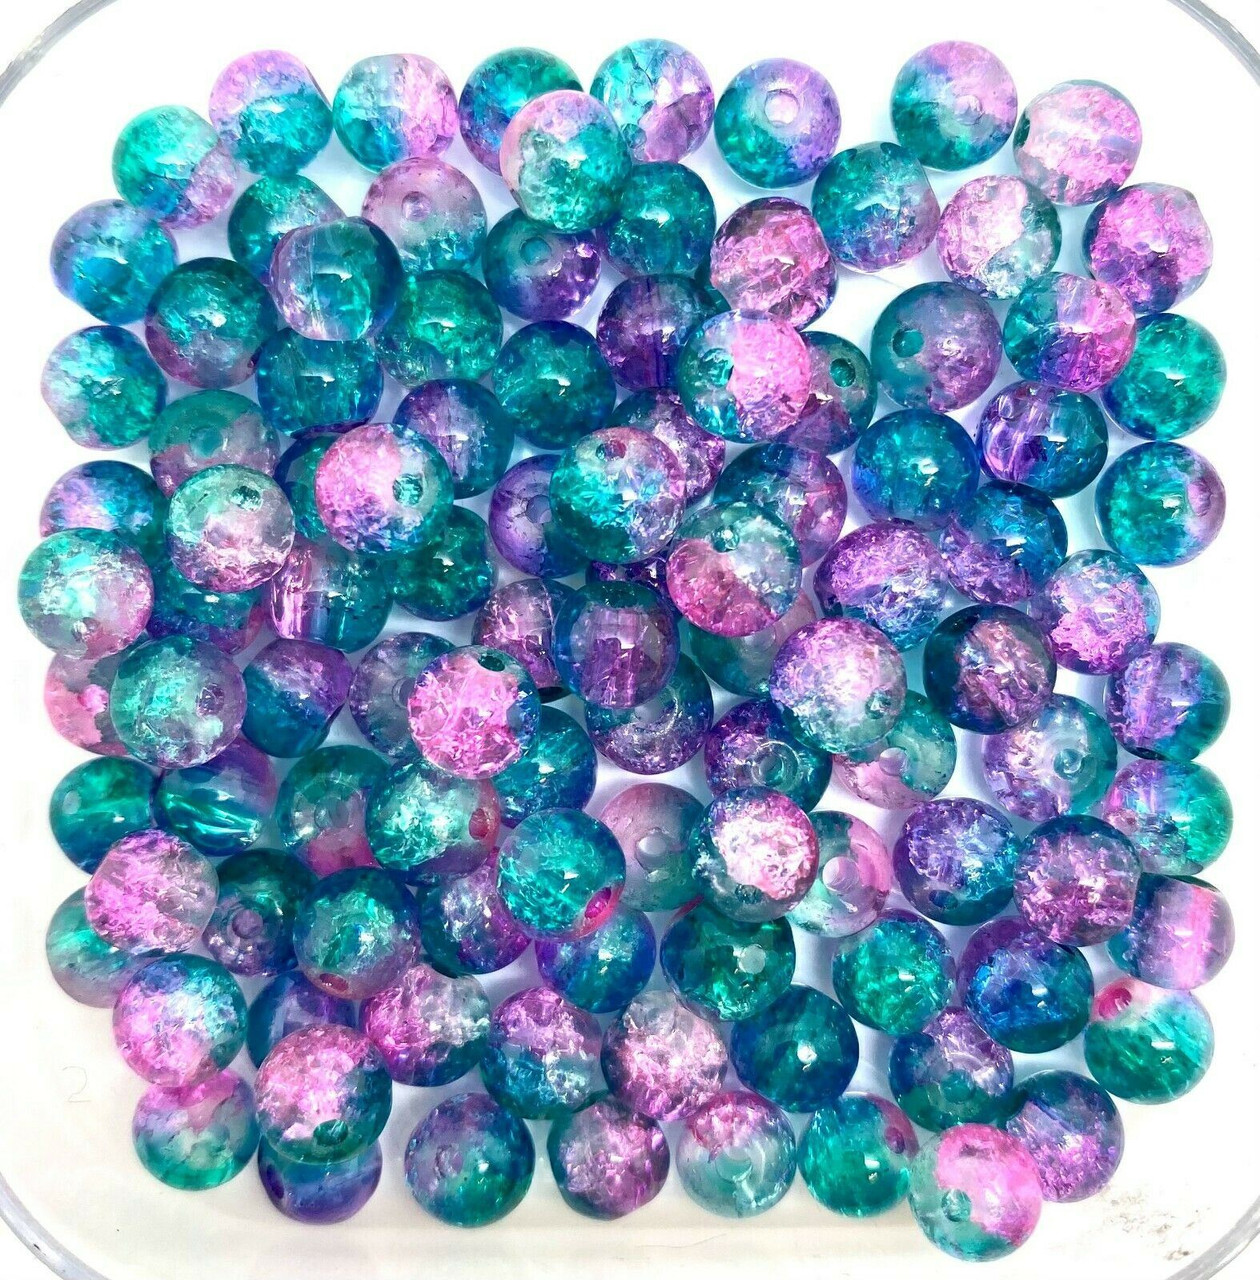 8mm Crackle Glass Beads - Pink & Teal, 50 beads